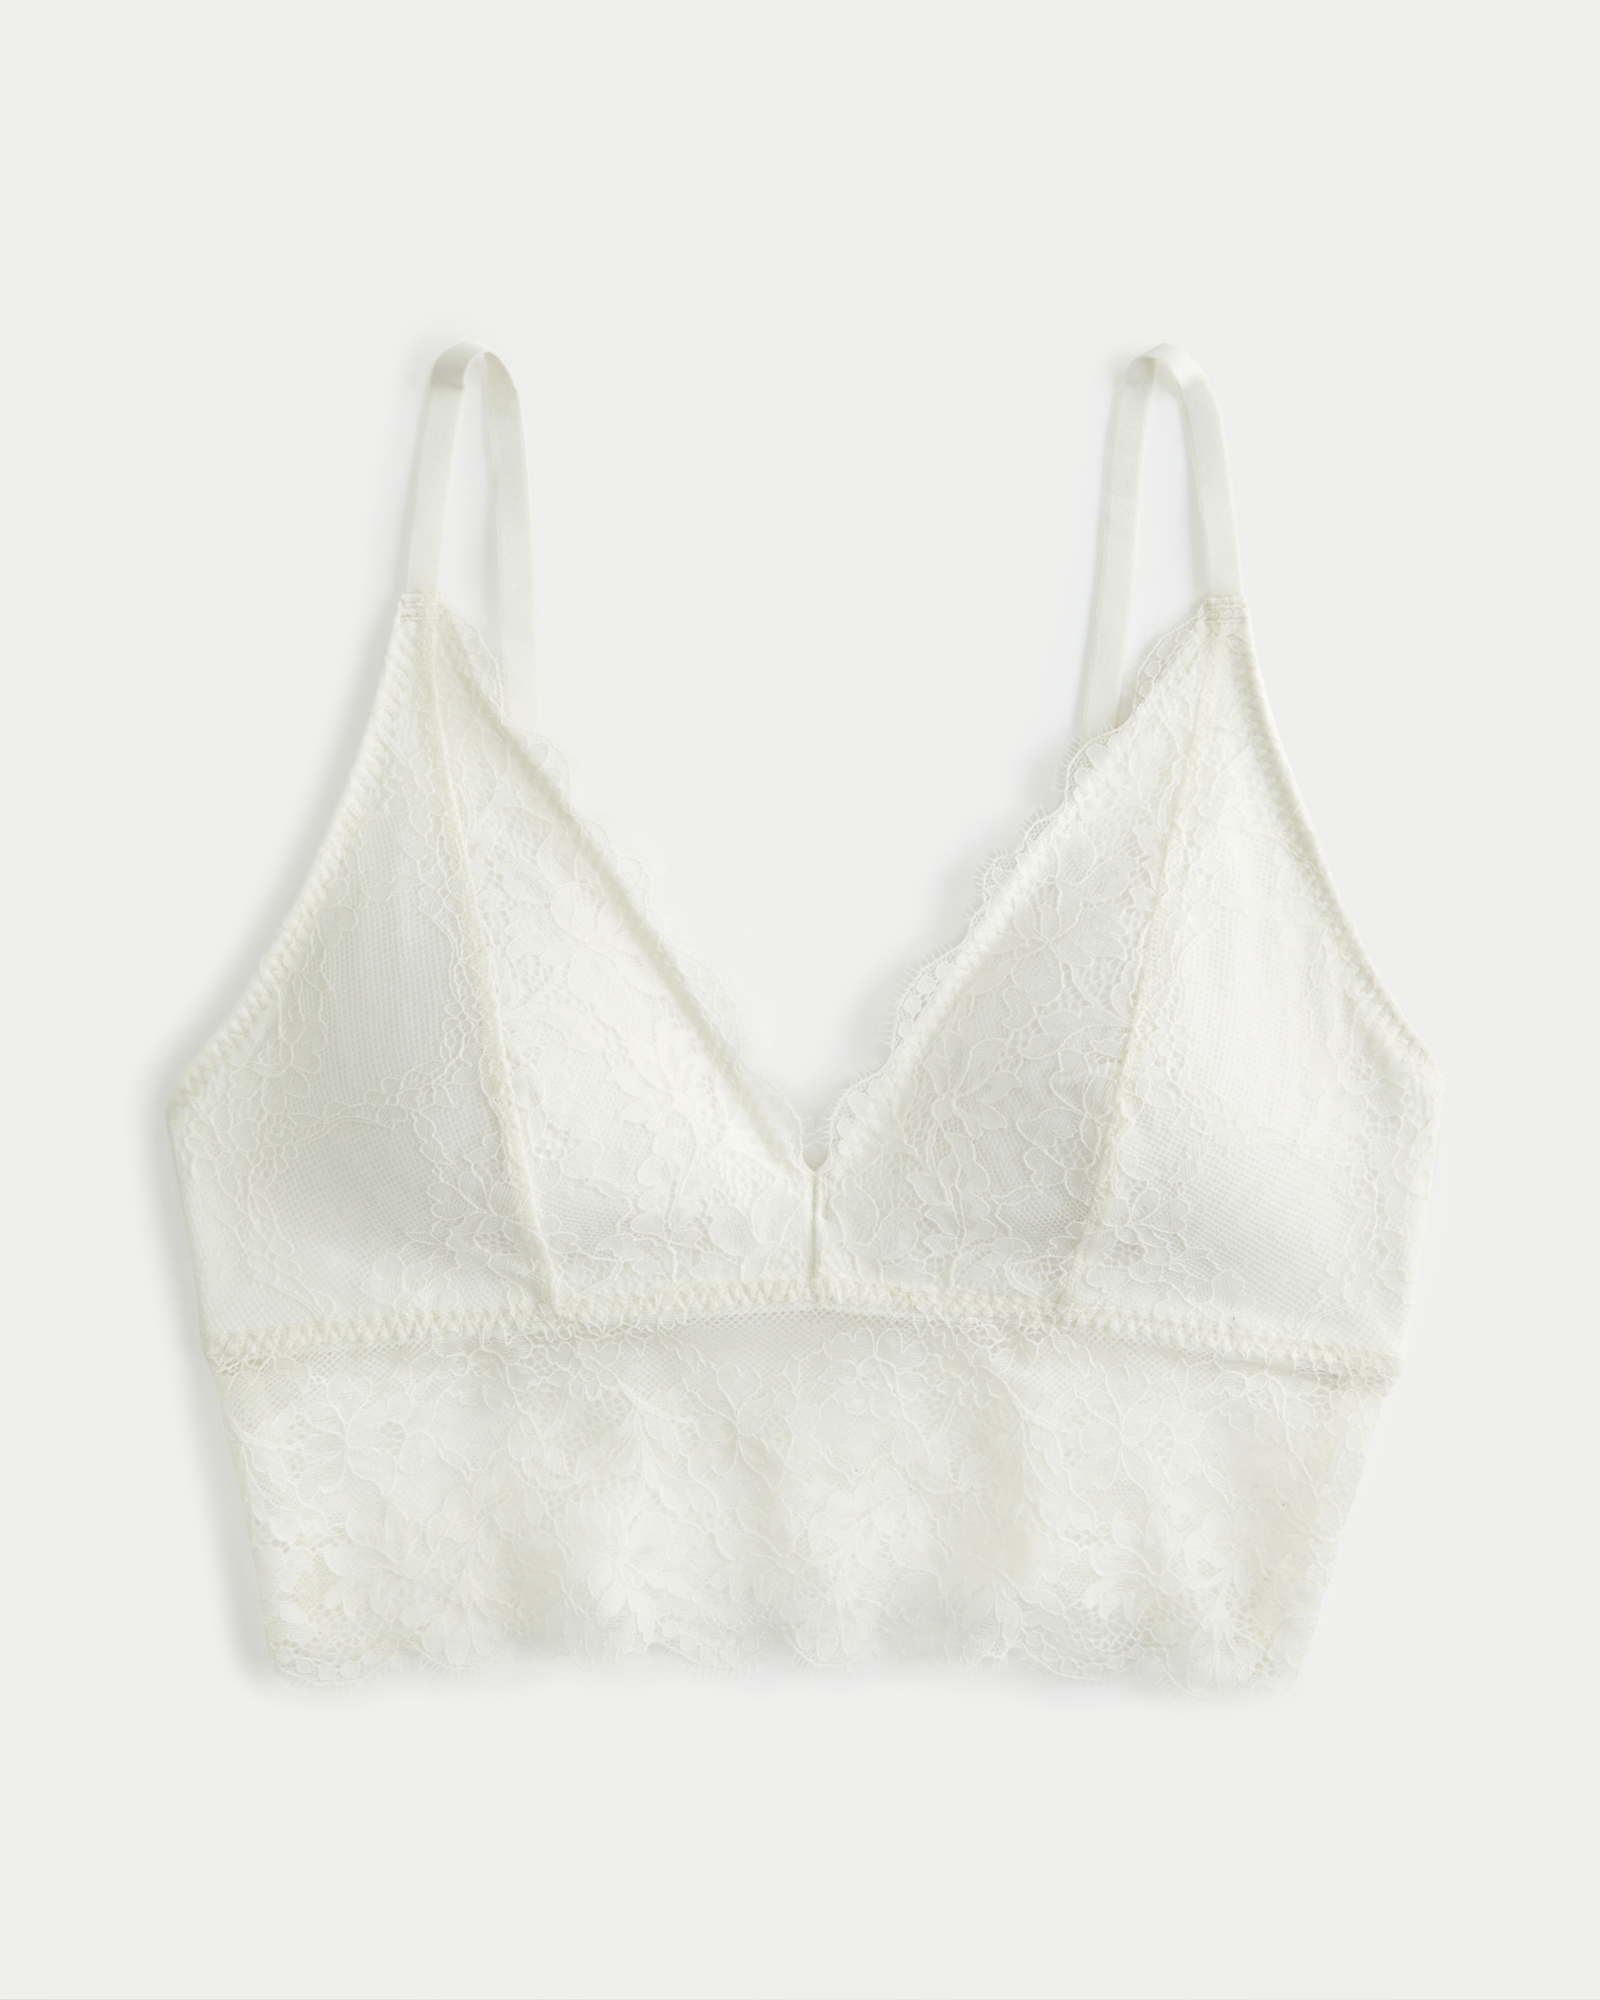 Gilly Hicks Lace Bralette White Size M - $17 (43% Off Retail) - From Brynne